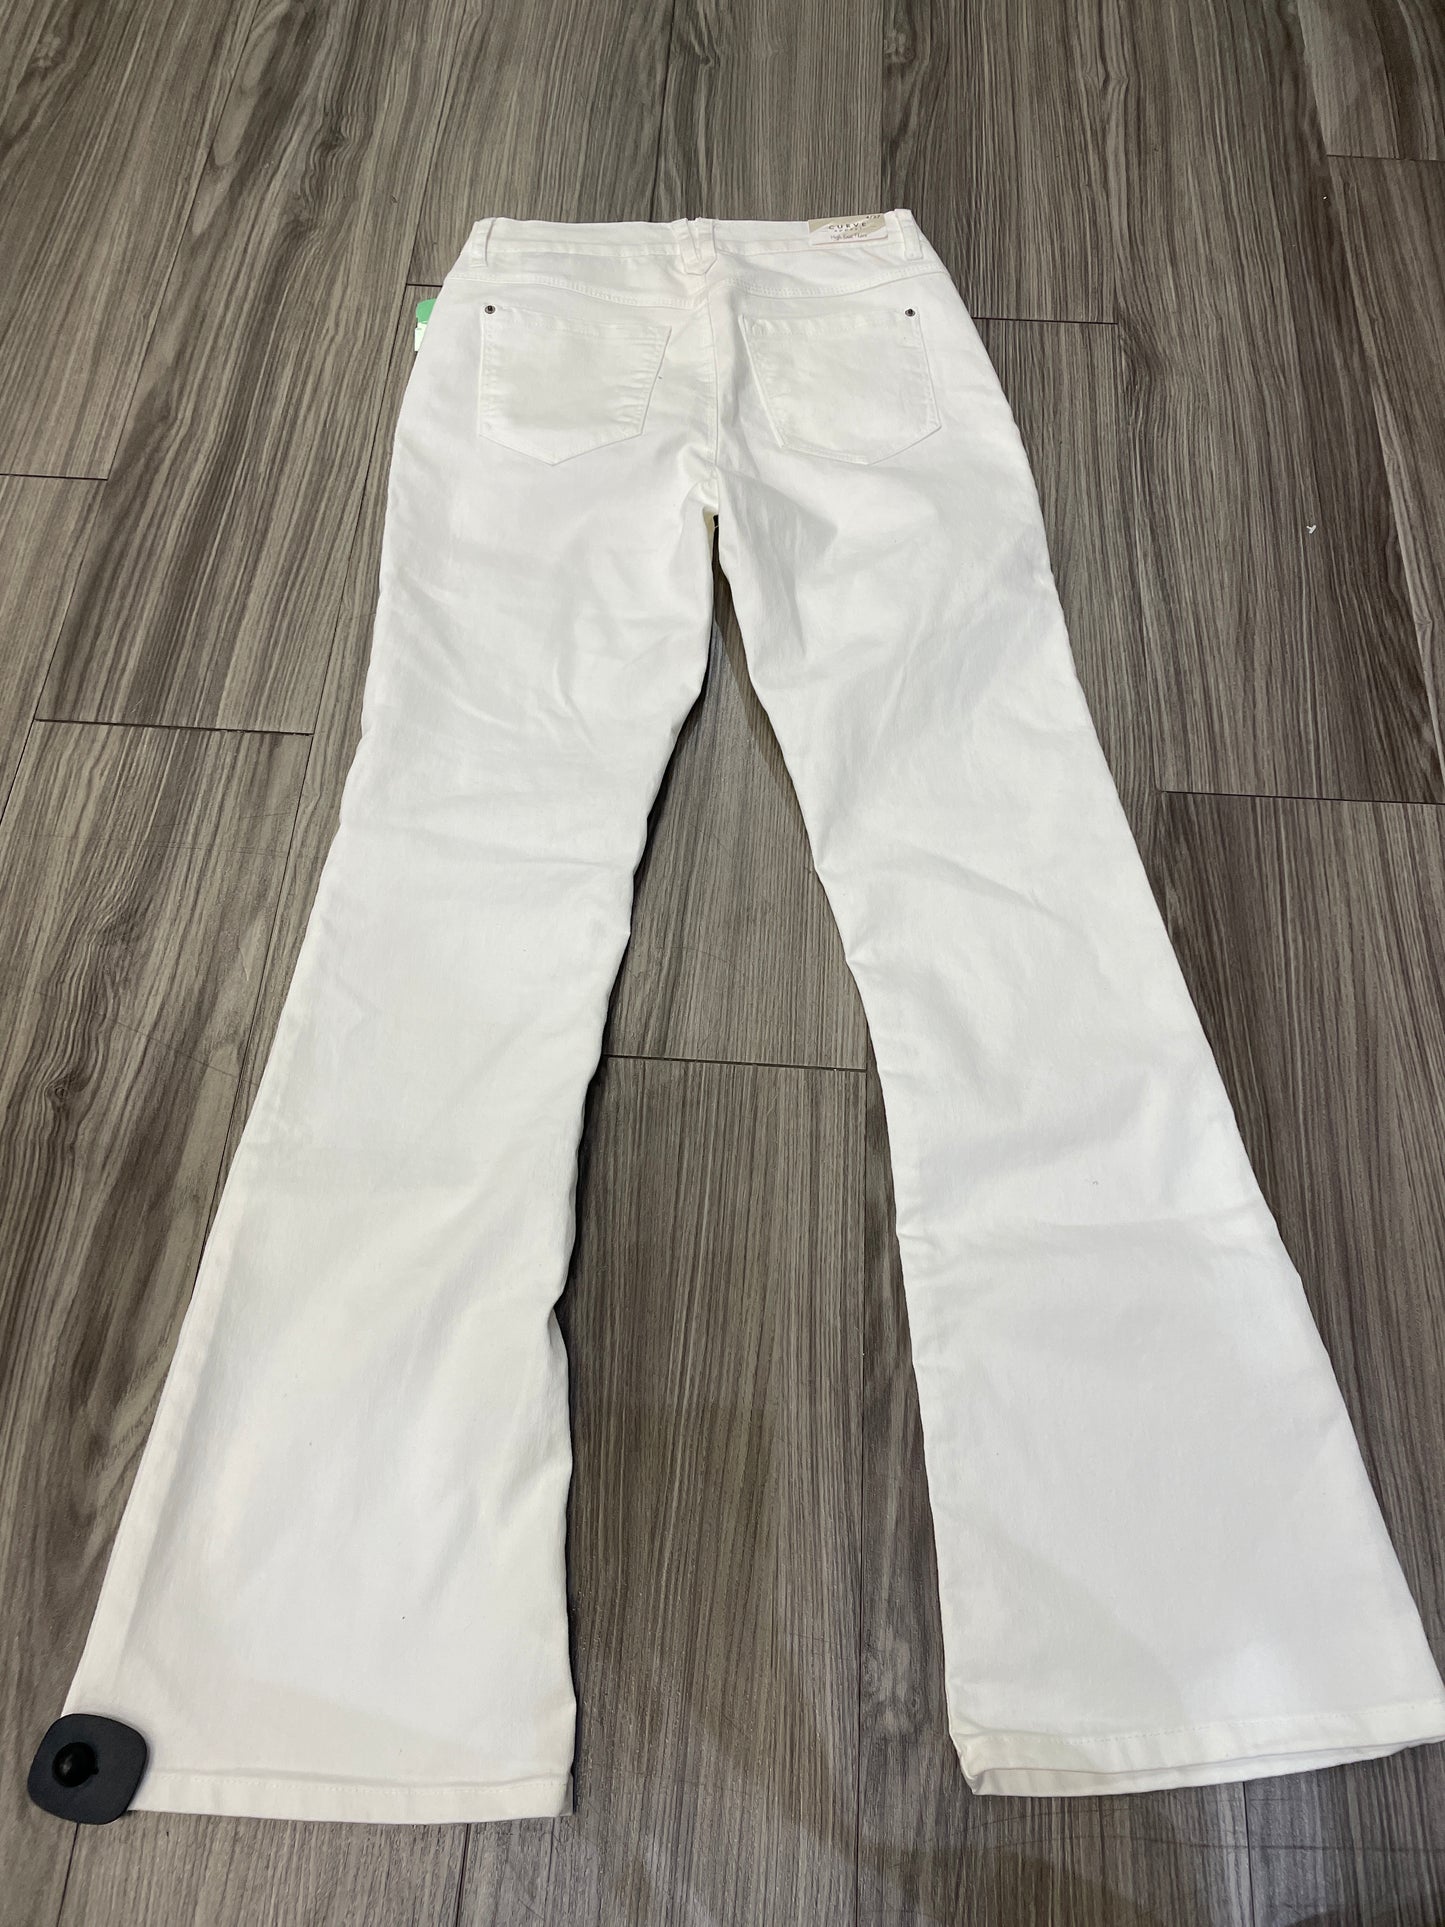 White Jeans Flared Curve Appeal, Size 4